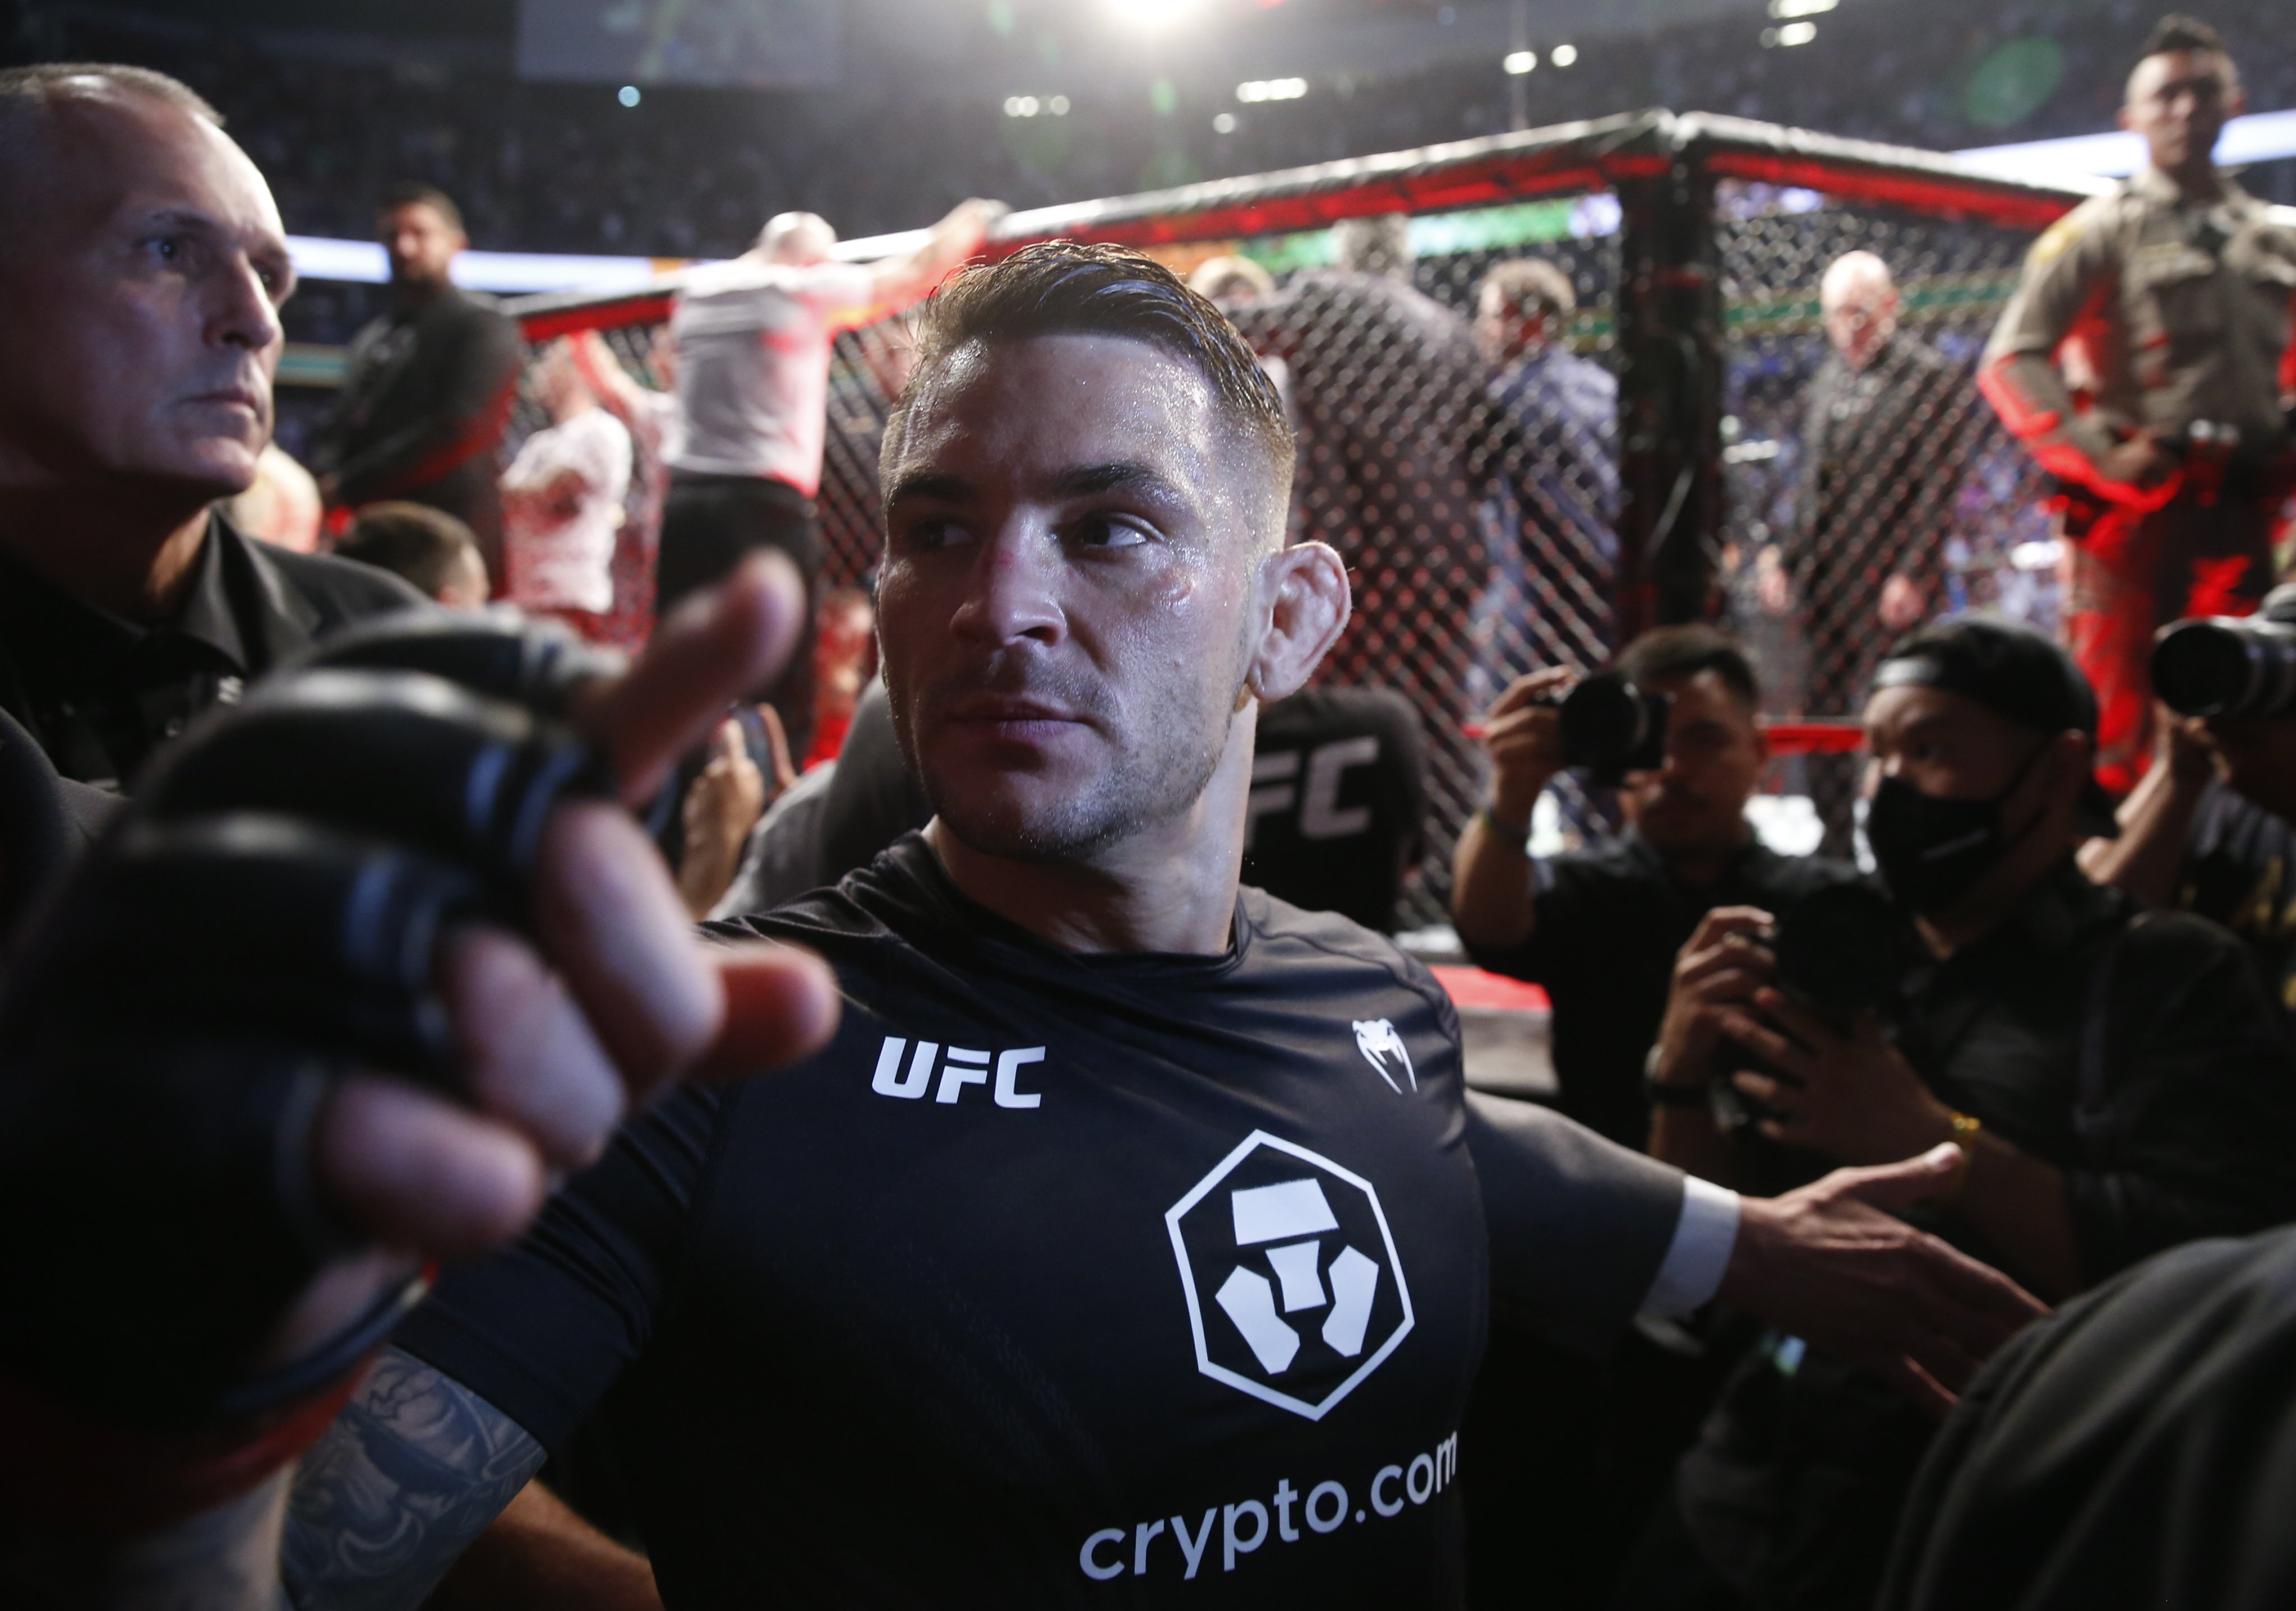 Is Dustin Poirier ready for superstar status this weekend? His title fight against Charles Oliveira may prove a defining moment in his career at UFC 269. Photo: Reuters